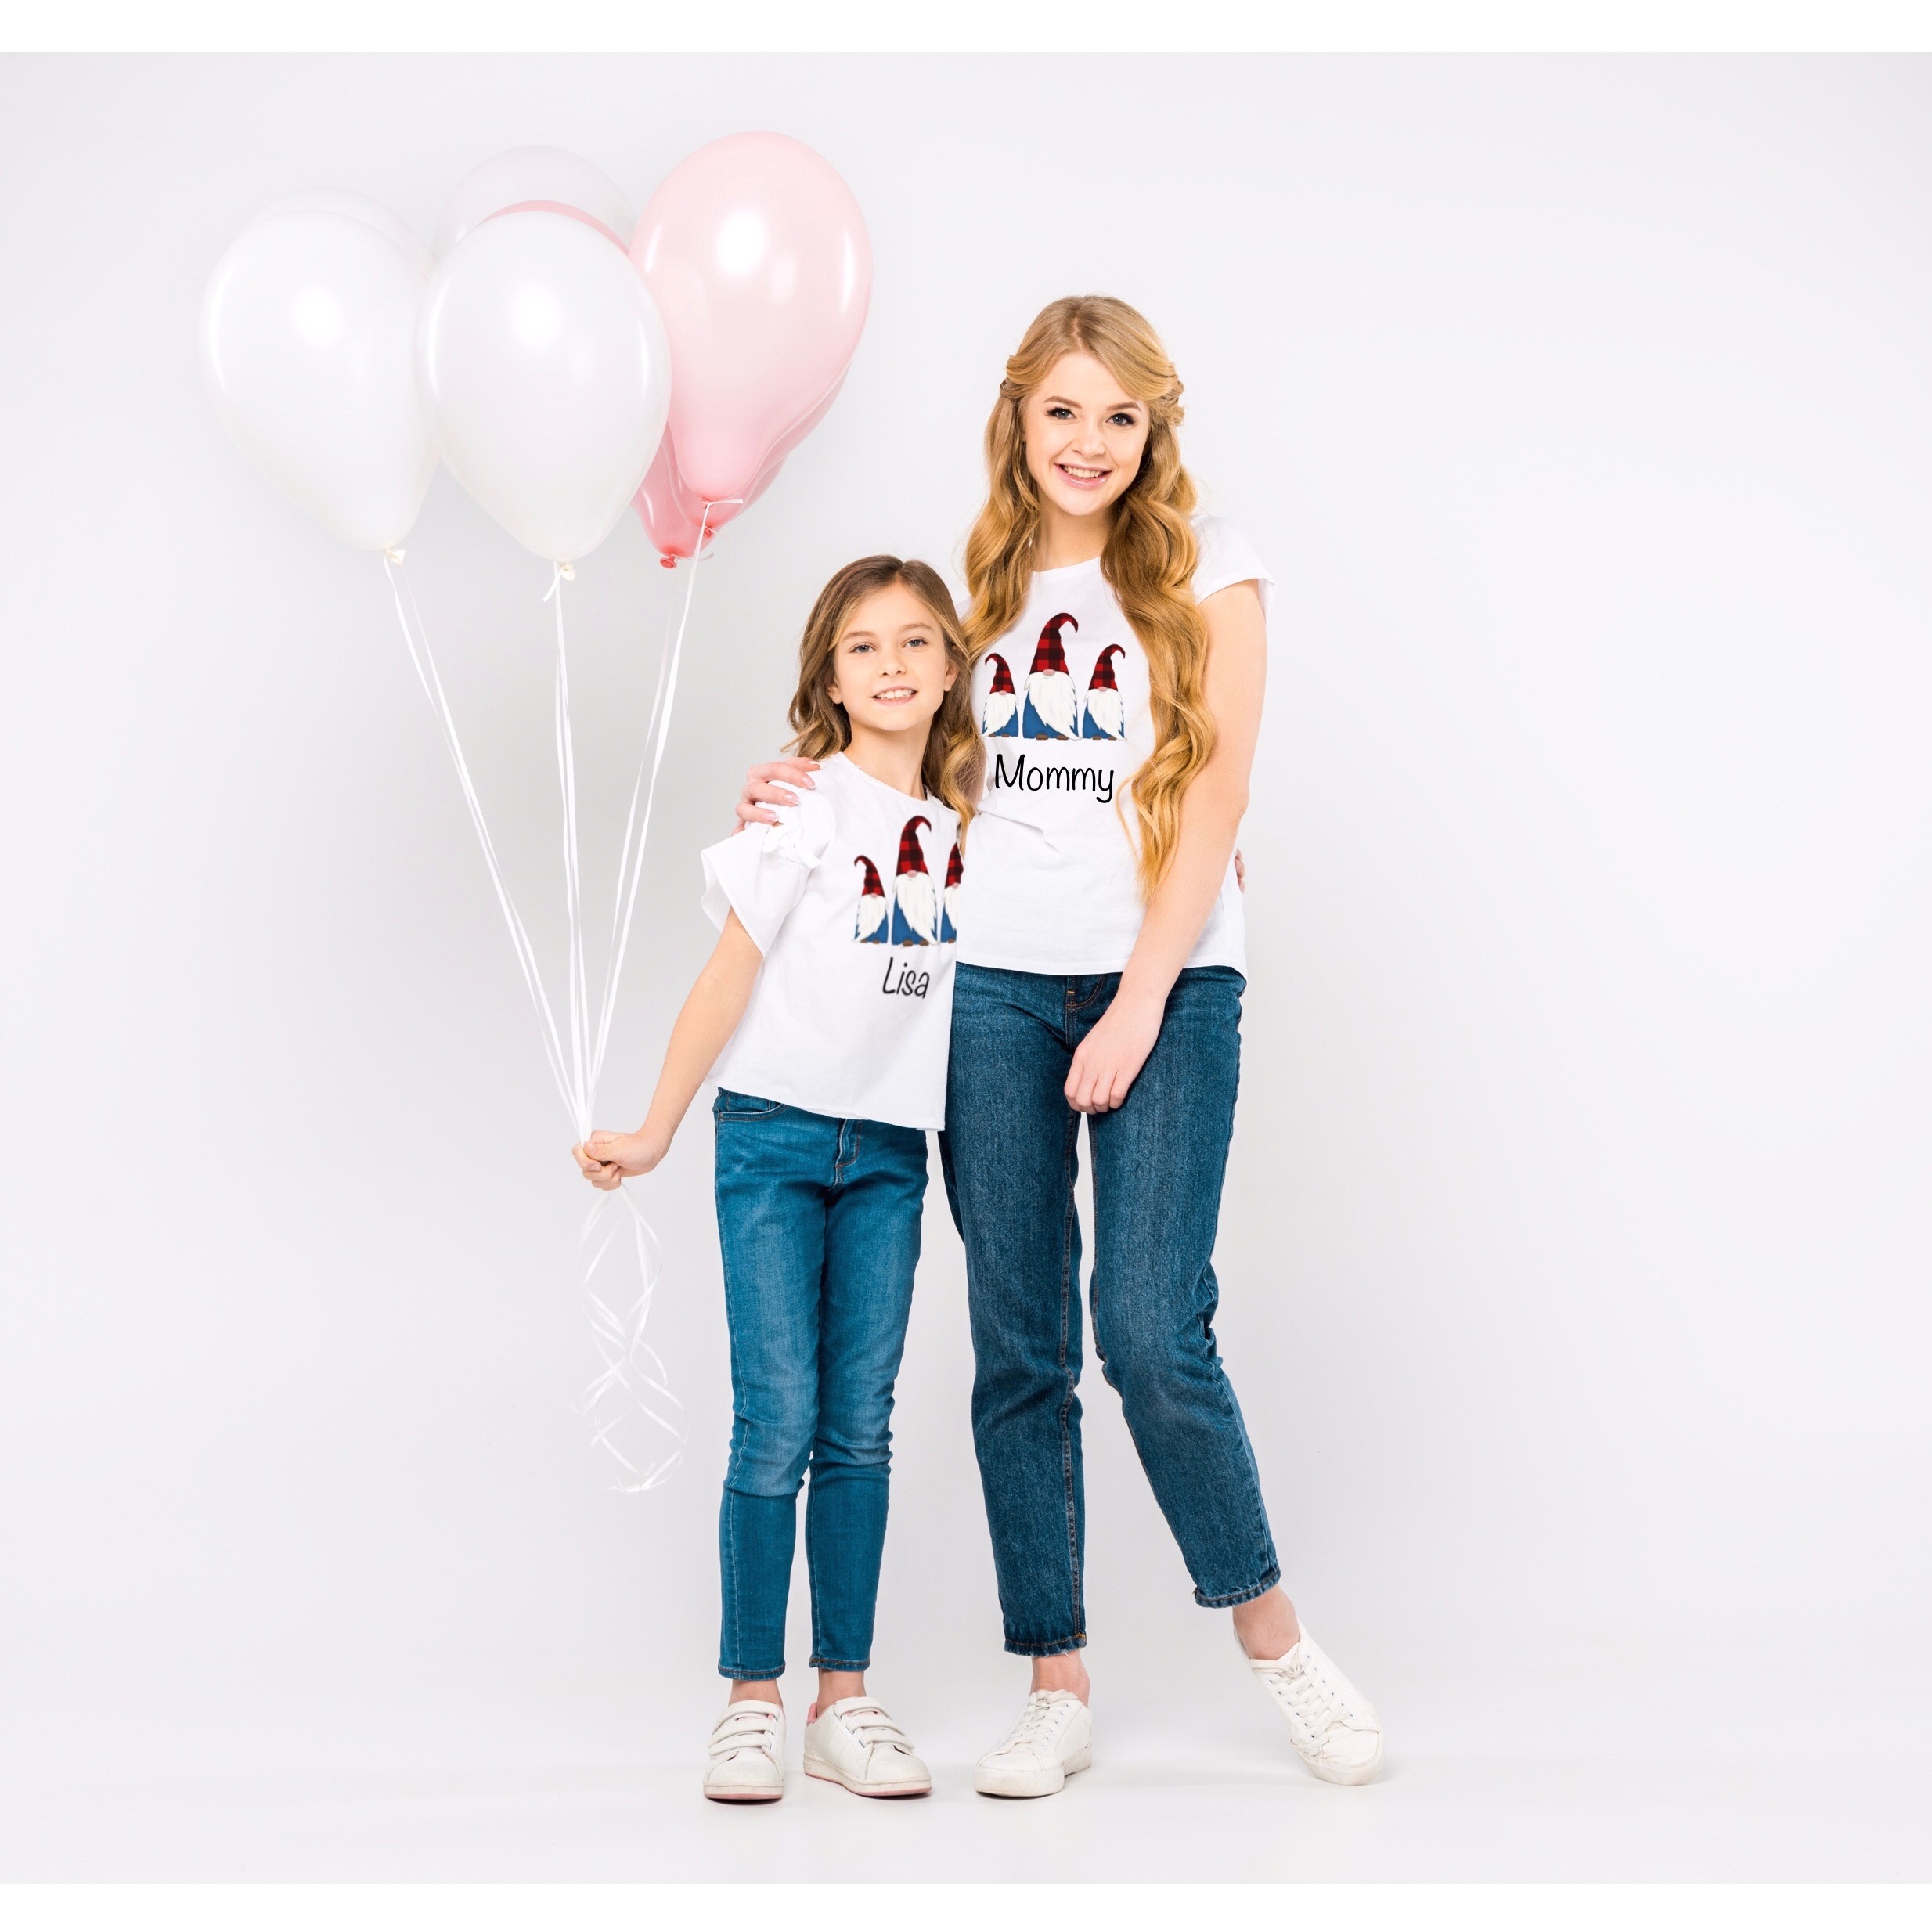 mom and daughter balloons